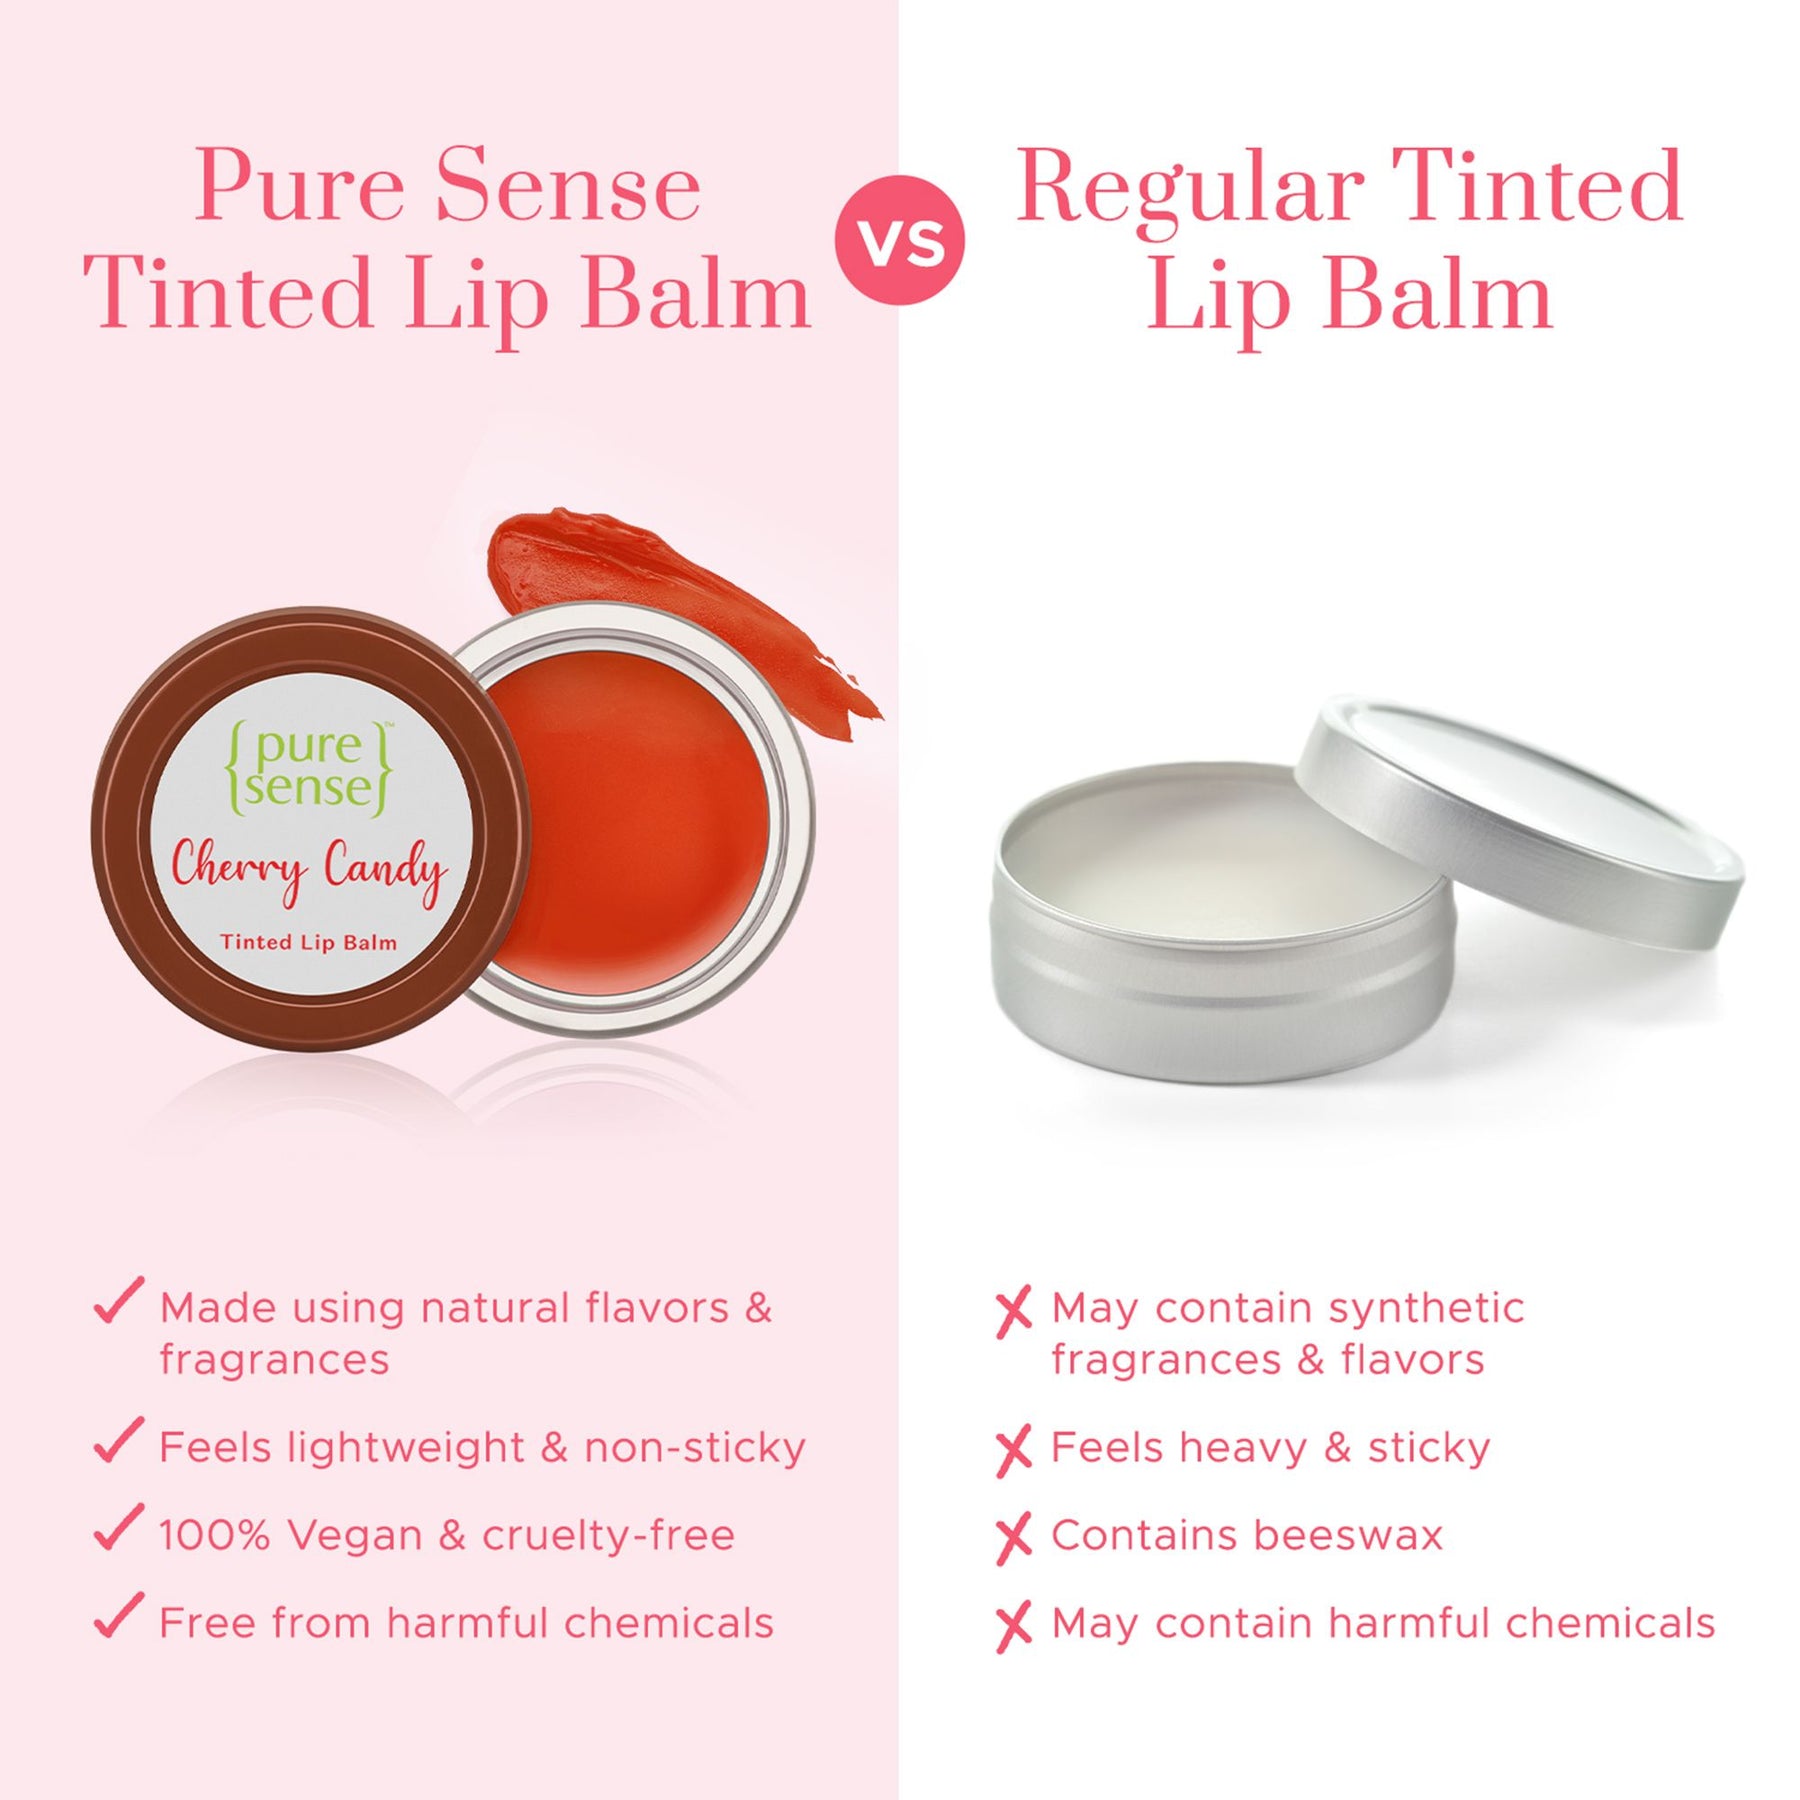 Cherry Candy Tinted Lip Balm | From the makers of Parachute Advansed | 5 ml - PureSense